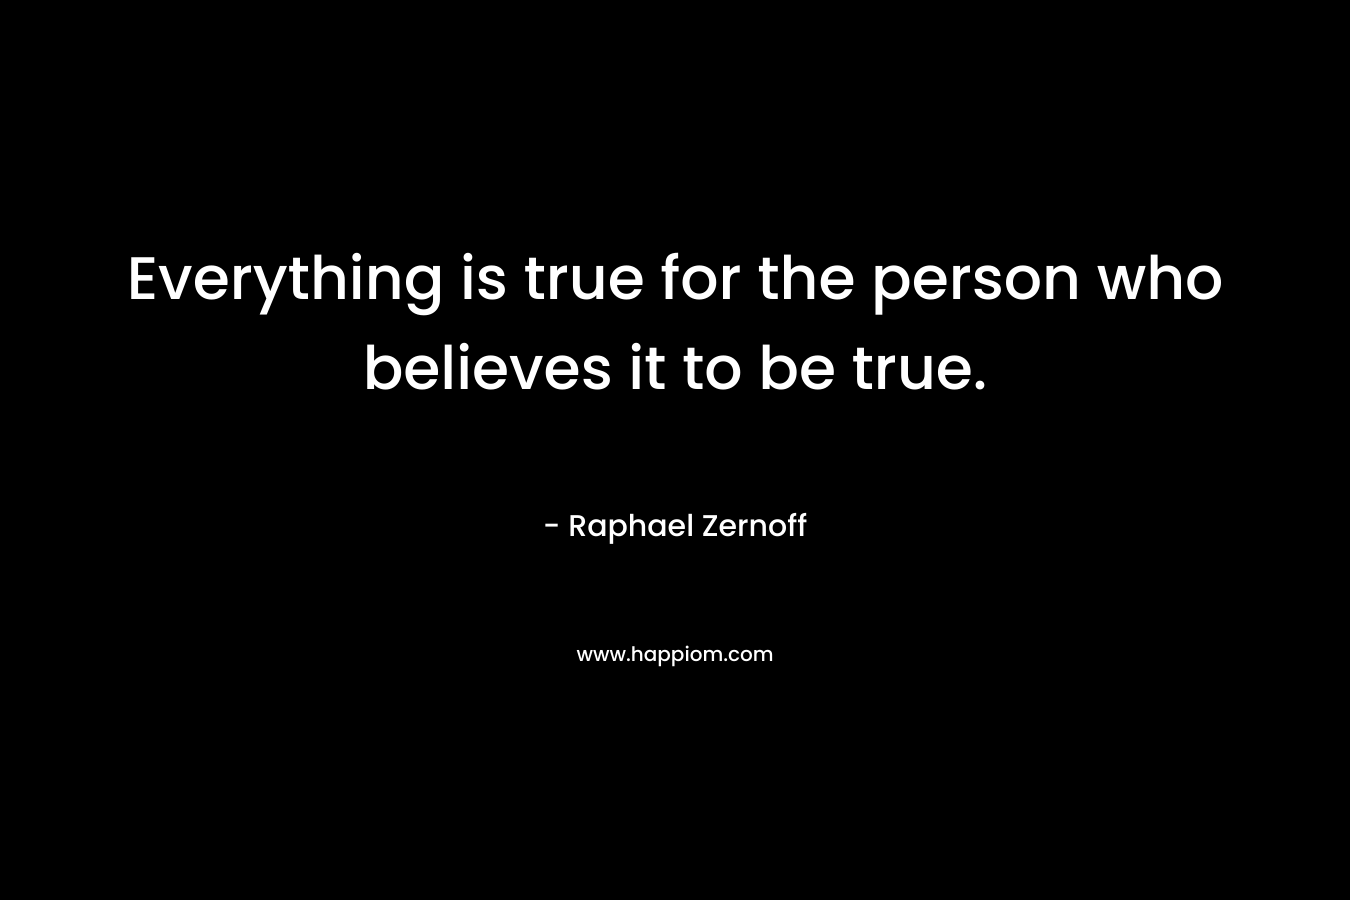 Everything is true for the person who believes it to be true.